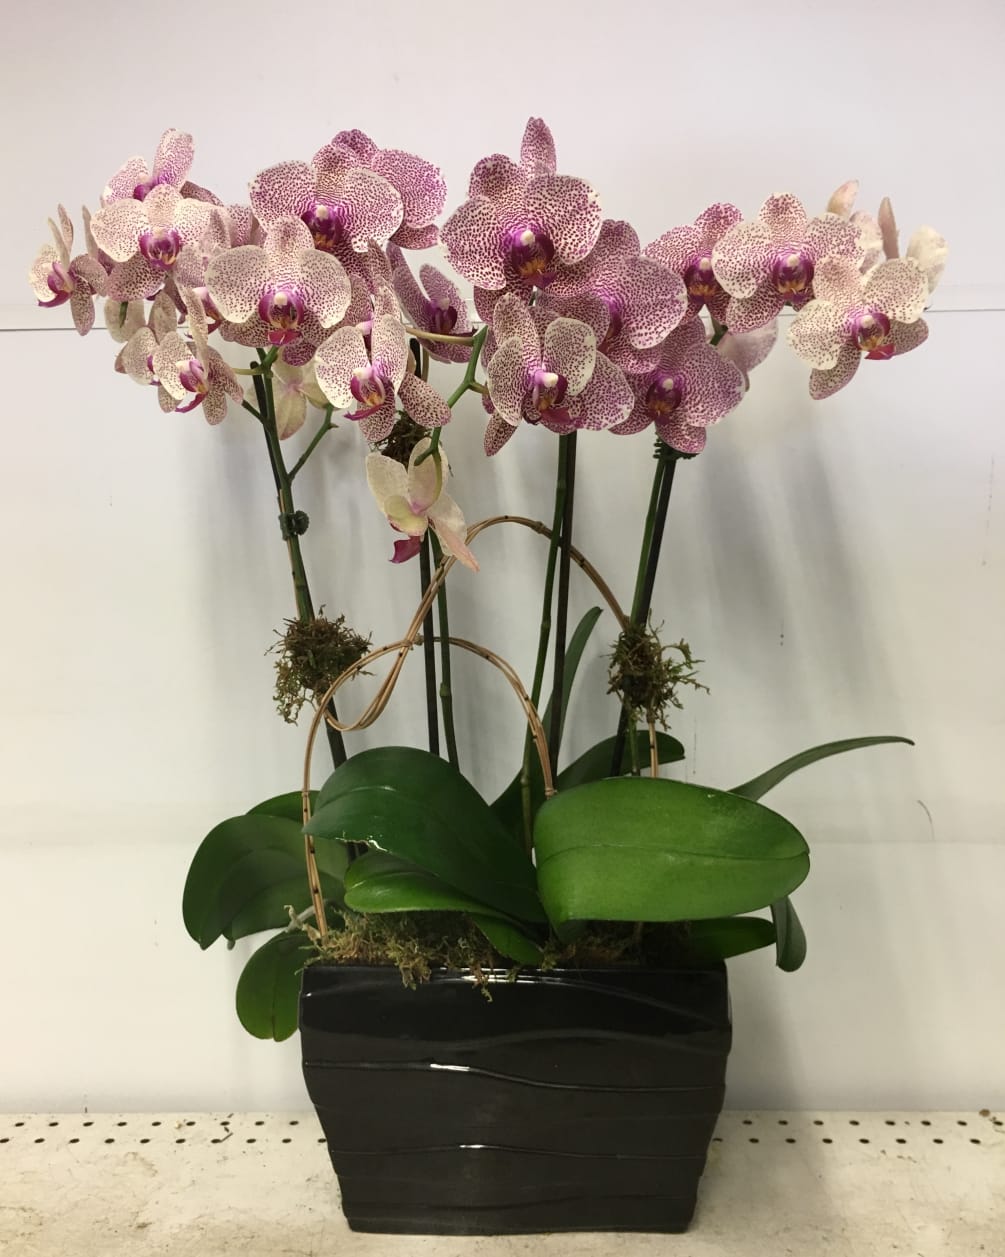 Cute dotted orchid arranged in a black vase. Orchid selection may vary